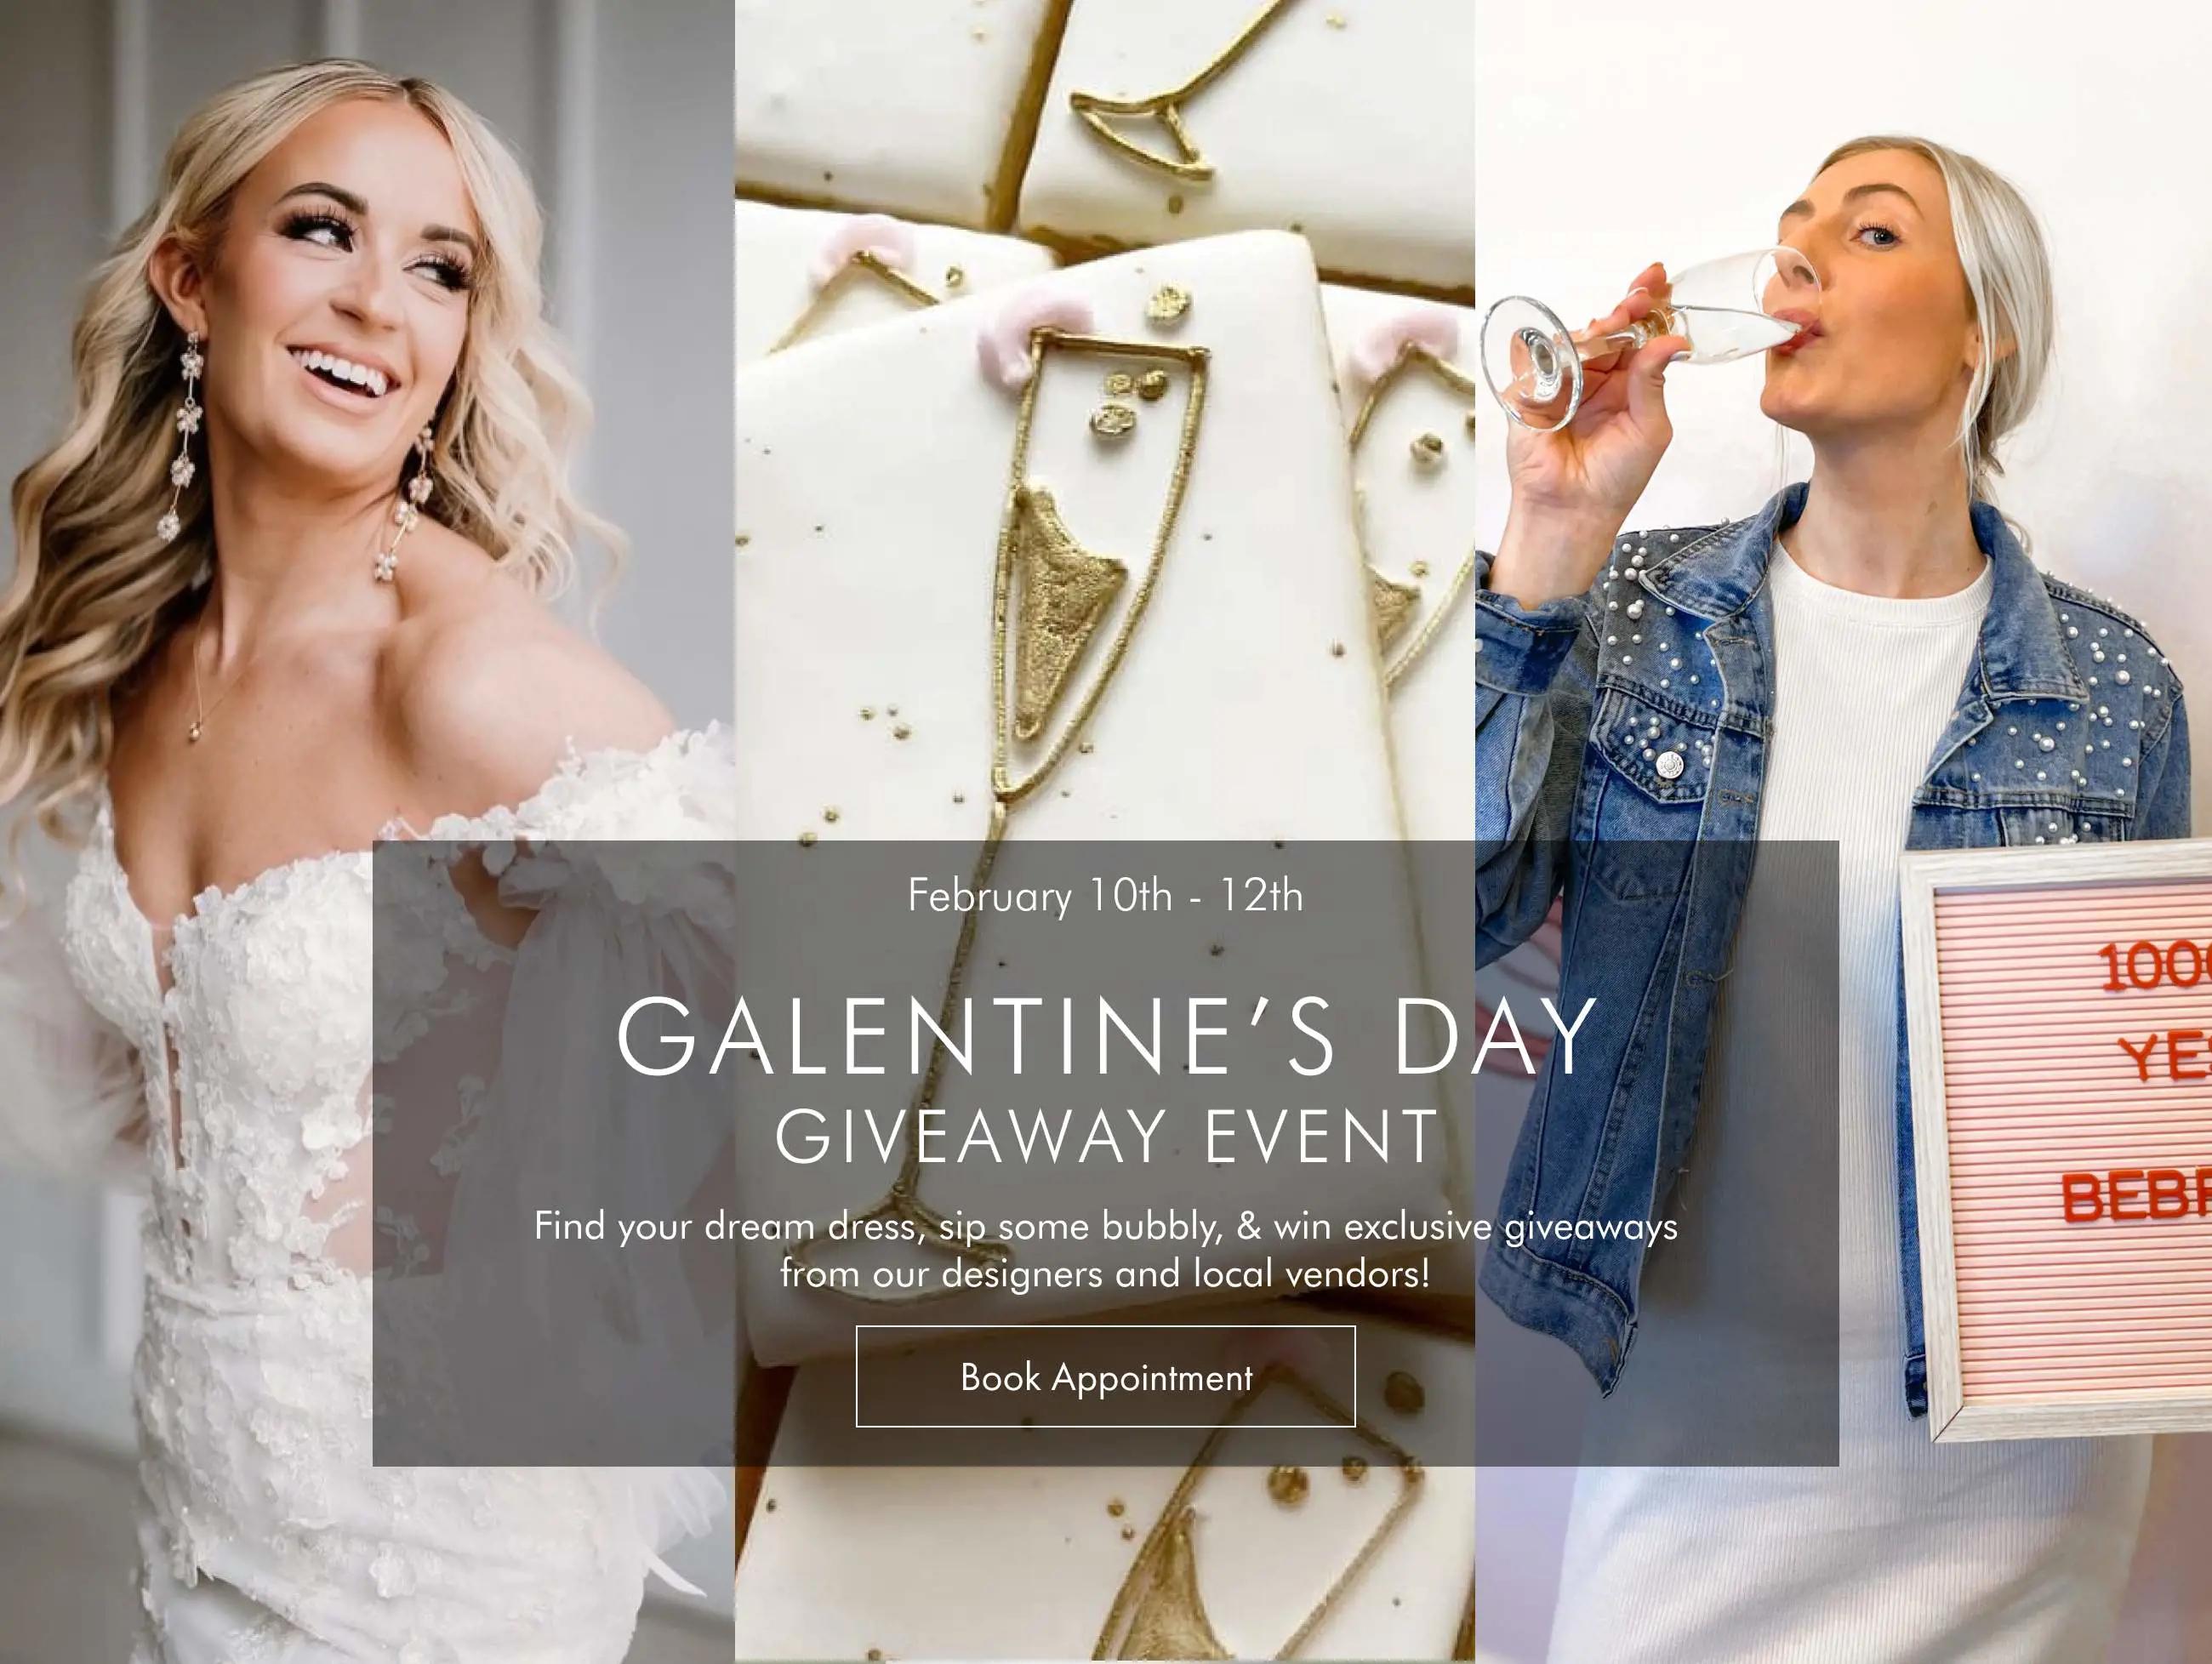 Galentine's Giveaway Event